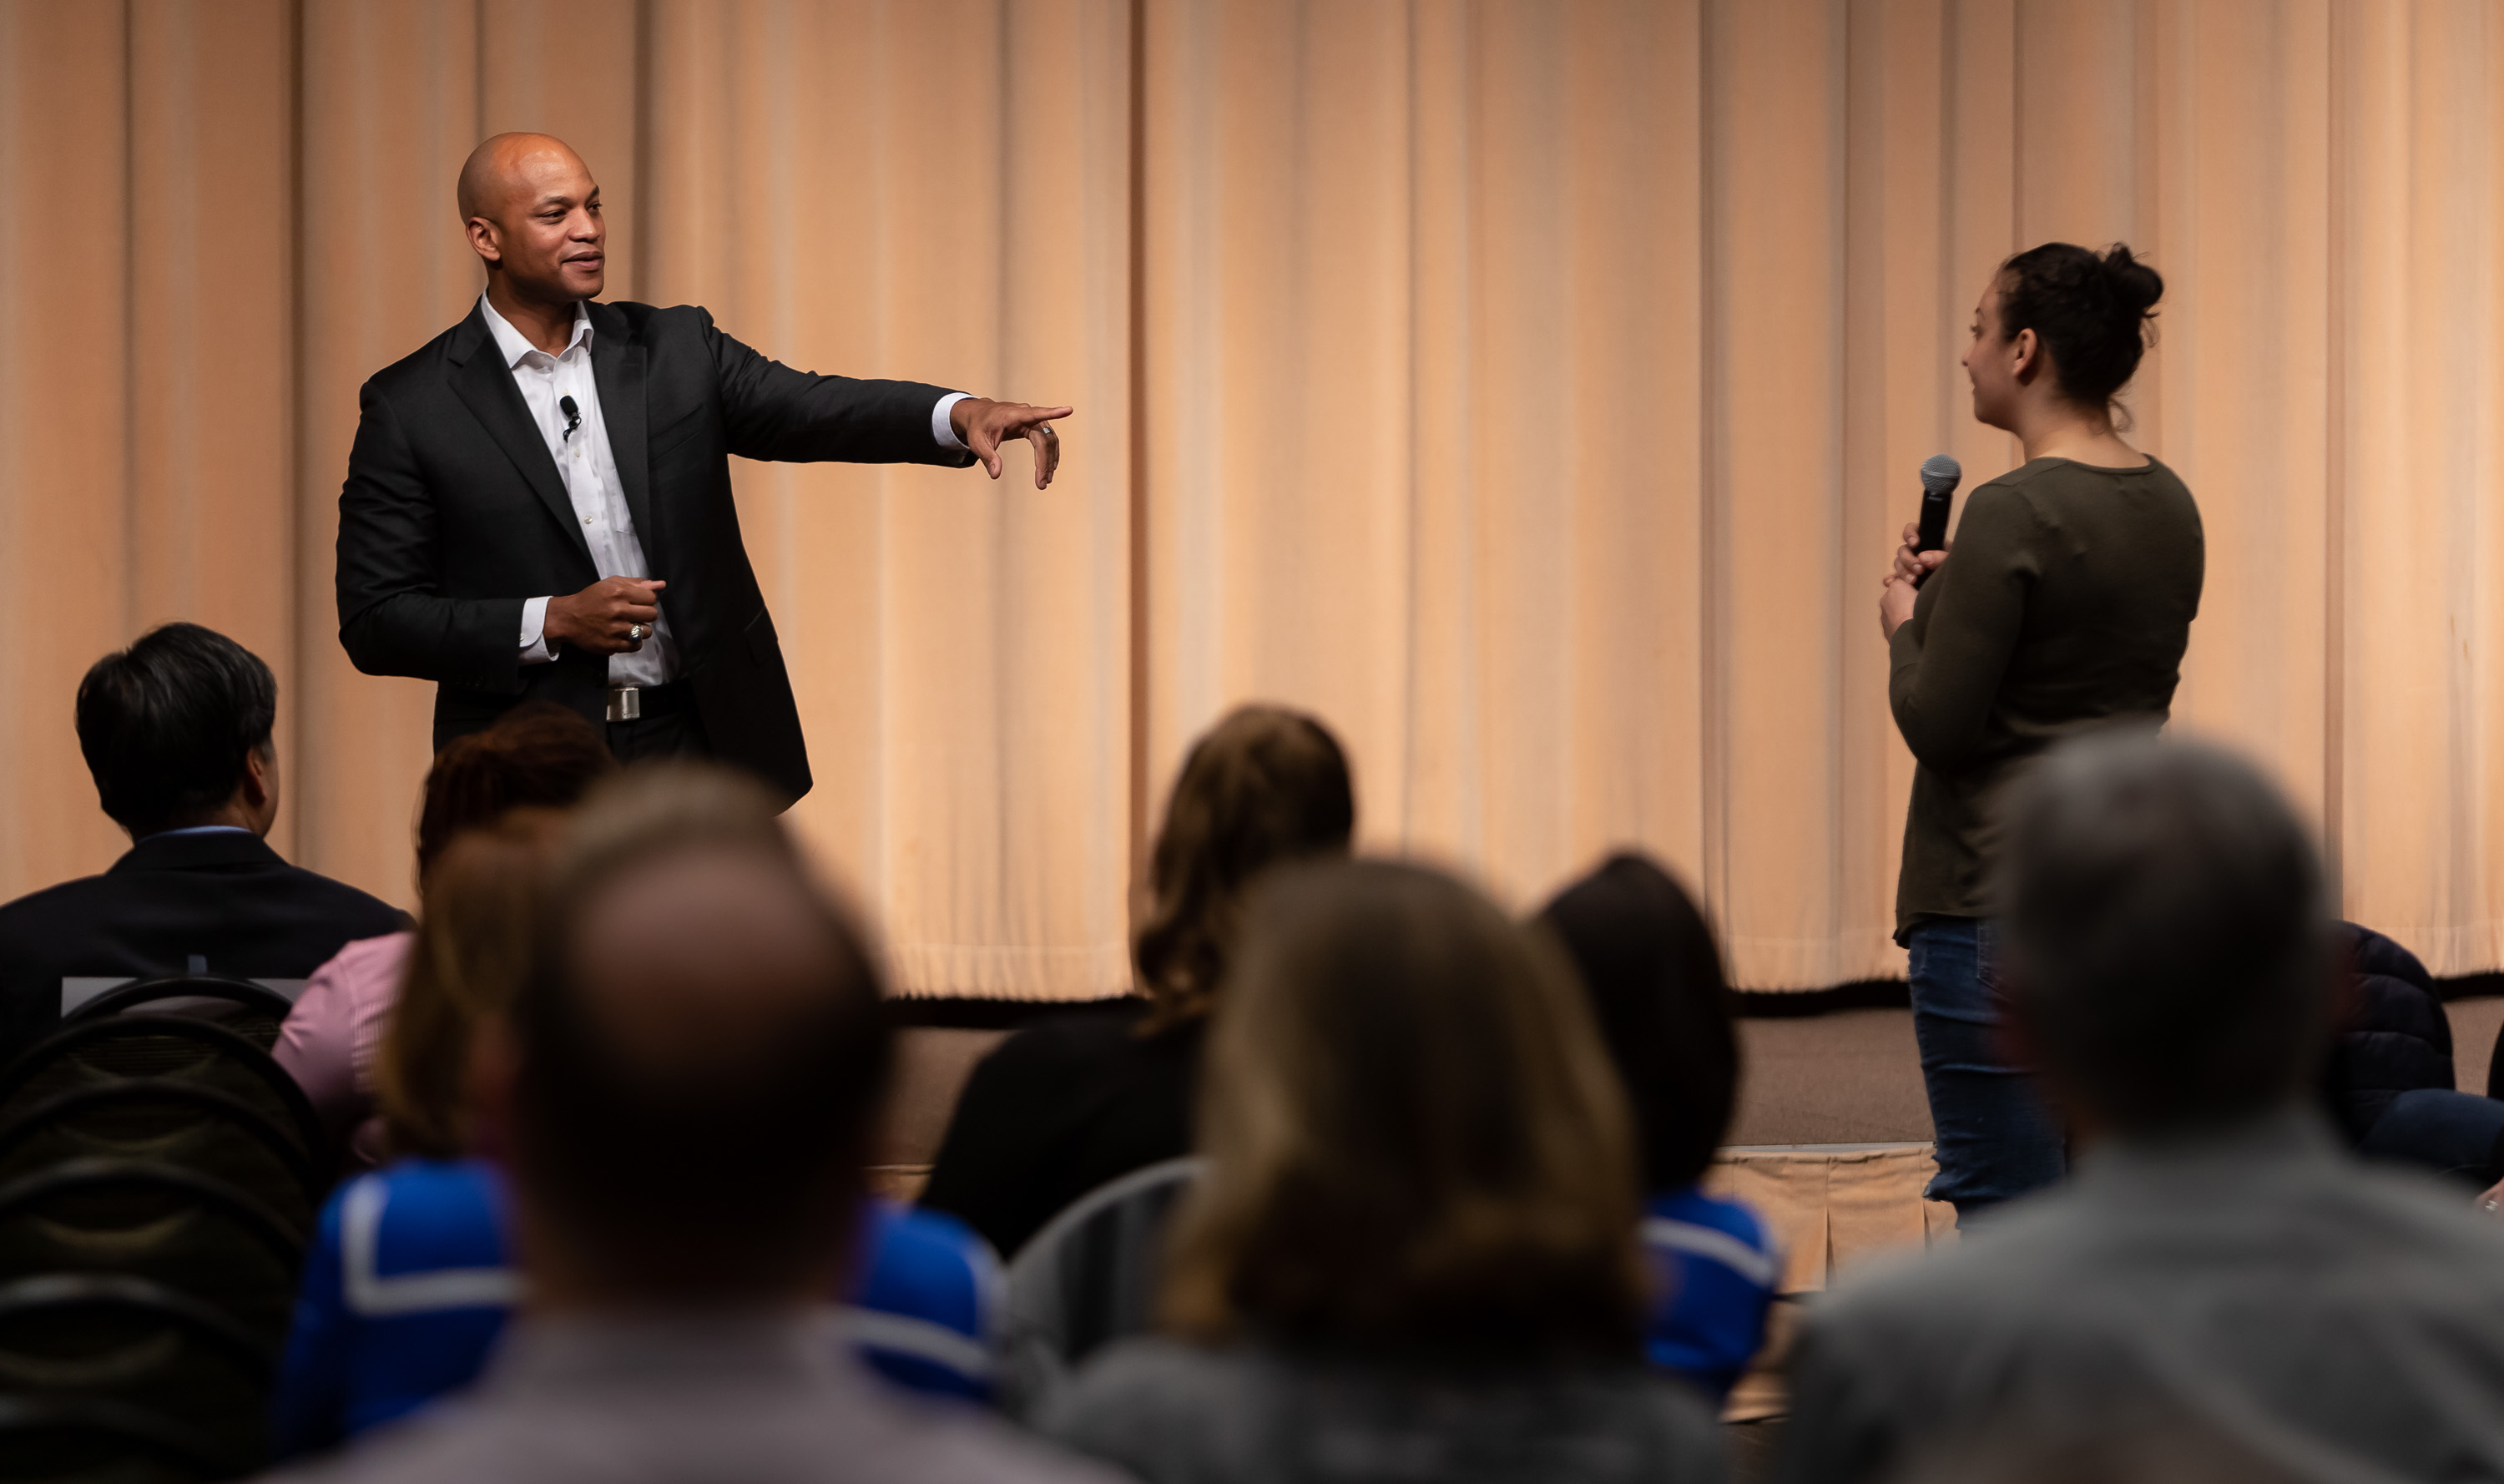 Wes Moore takes questions from the audience at the end of his presentation. (DePaul University/Jeff Carrion)